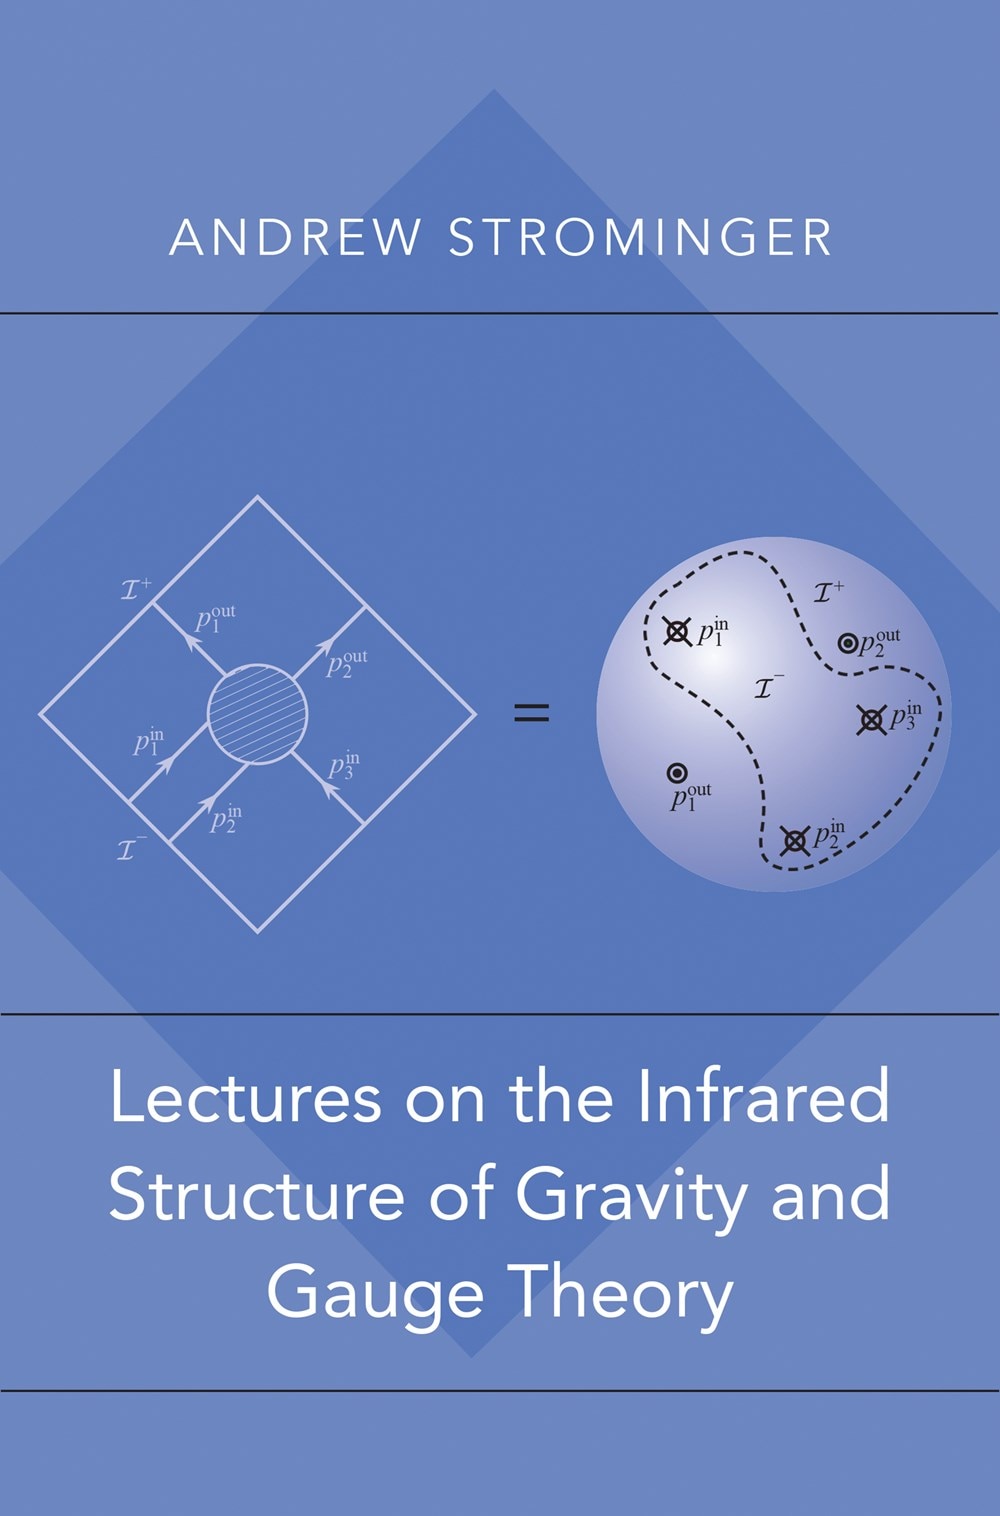 Lectures on the Infrared Structure of Gravity and Gauge Theory